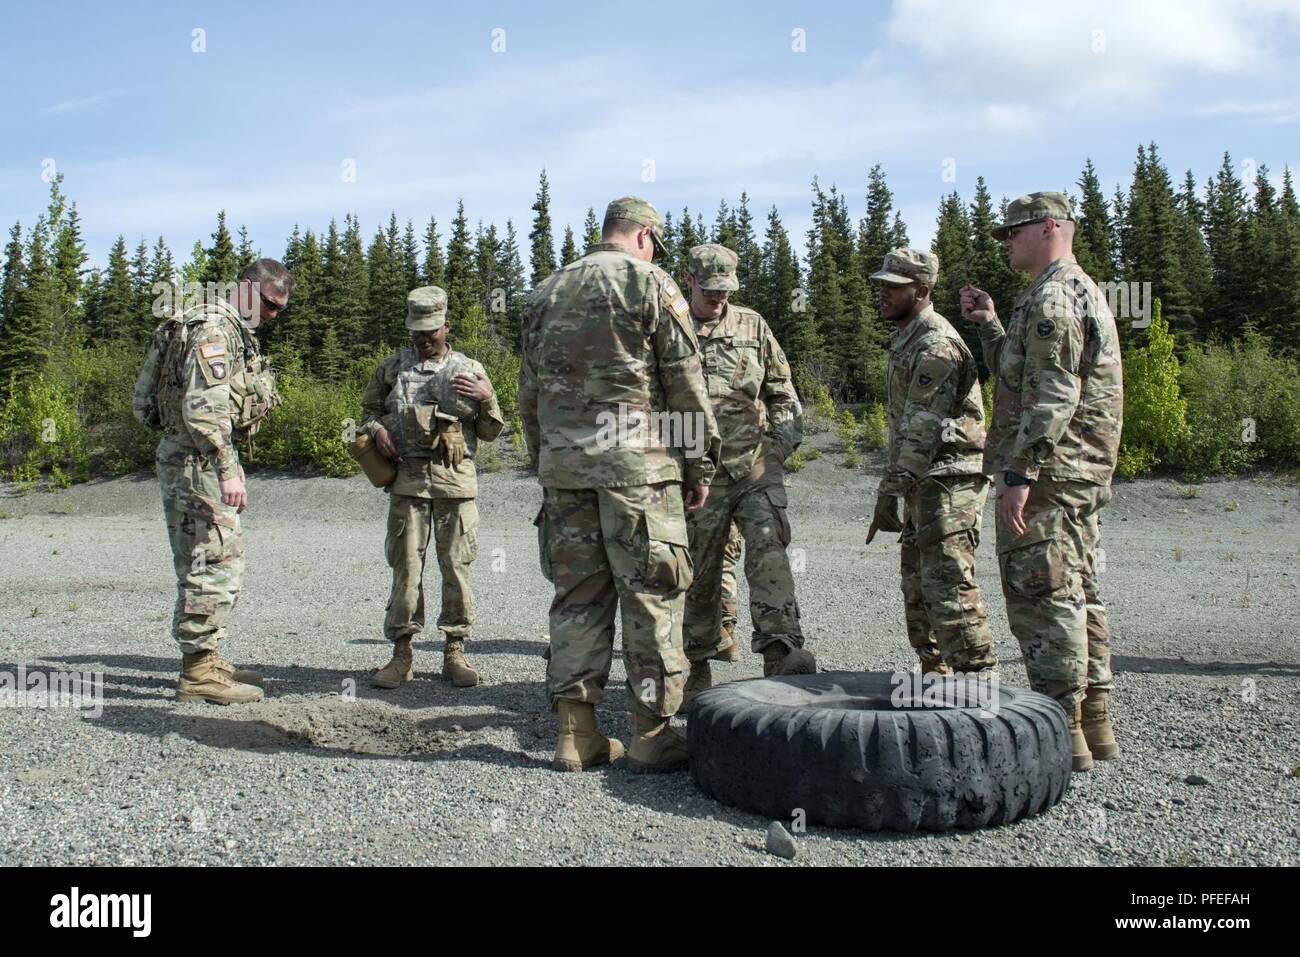 Soldiers assigned to the 109th Transportation Company, 17th Combat Sustainment Support Battalion, U.S. Army Alaska, examine the impacts of an exploded M67 fragmentation grenade after completing live-fire at training at Joint Base Elmendorf-Richardson, Alaska, May 31, 2018. During the familiarization training the Soldiers threw live hand grenades to hone their proficiency. The M67 fragmentation grenade has a lethal radius of 5 meters and can produce casualties up to 15 meters, dispersing shrapnel as far as 230 meters. Stock Photo